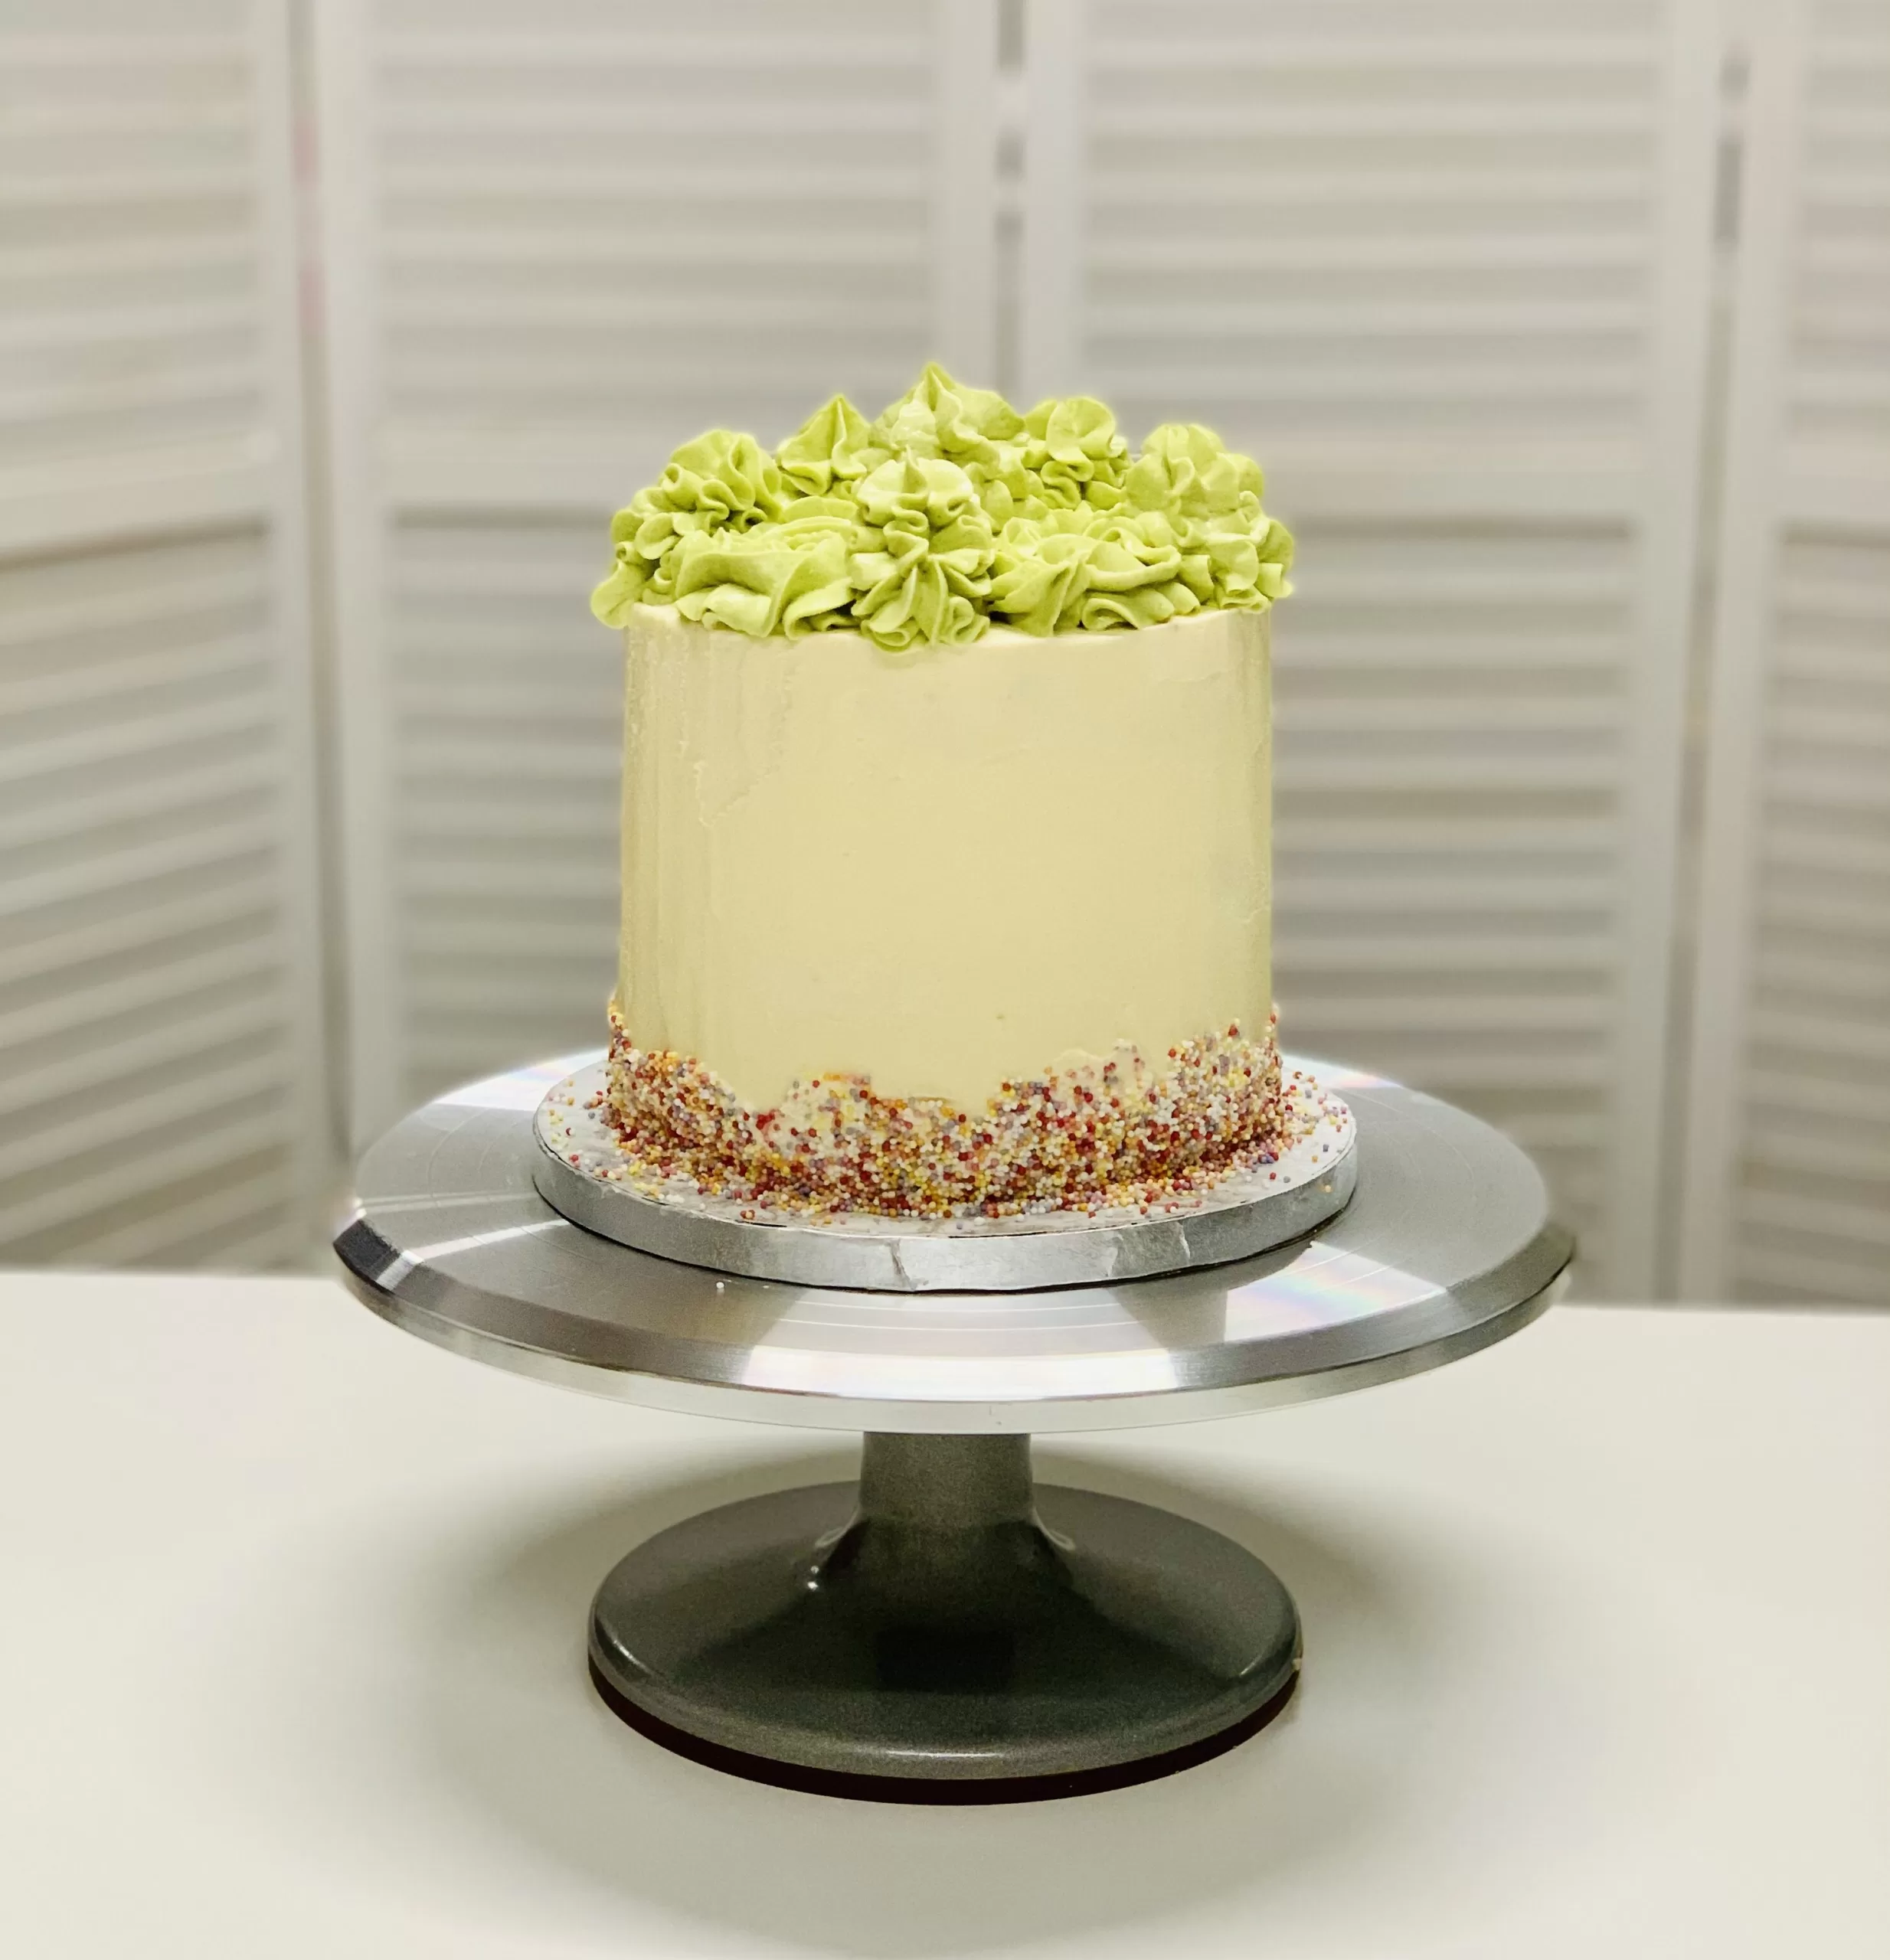 The London Cake Academy UK shows a cake decorated in buttercream and sprinkles with green frosting on top